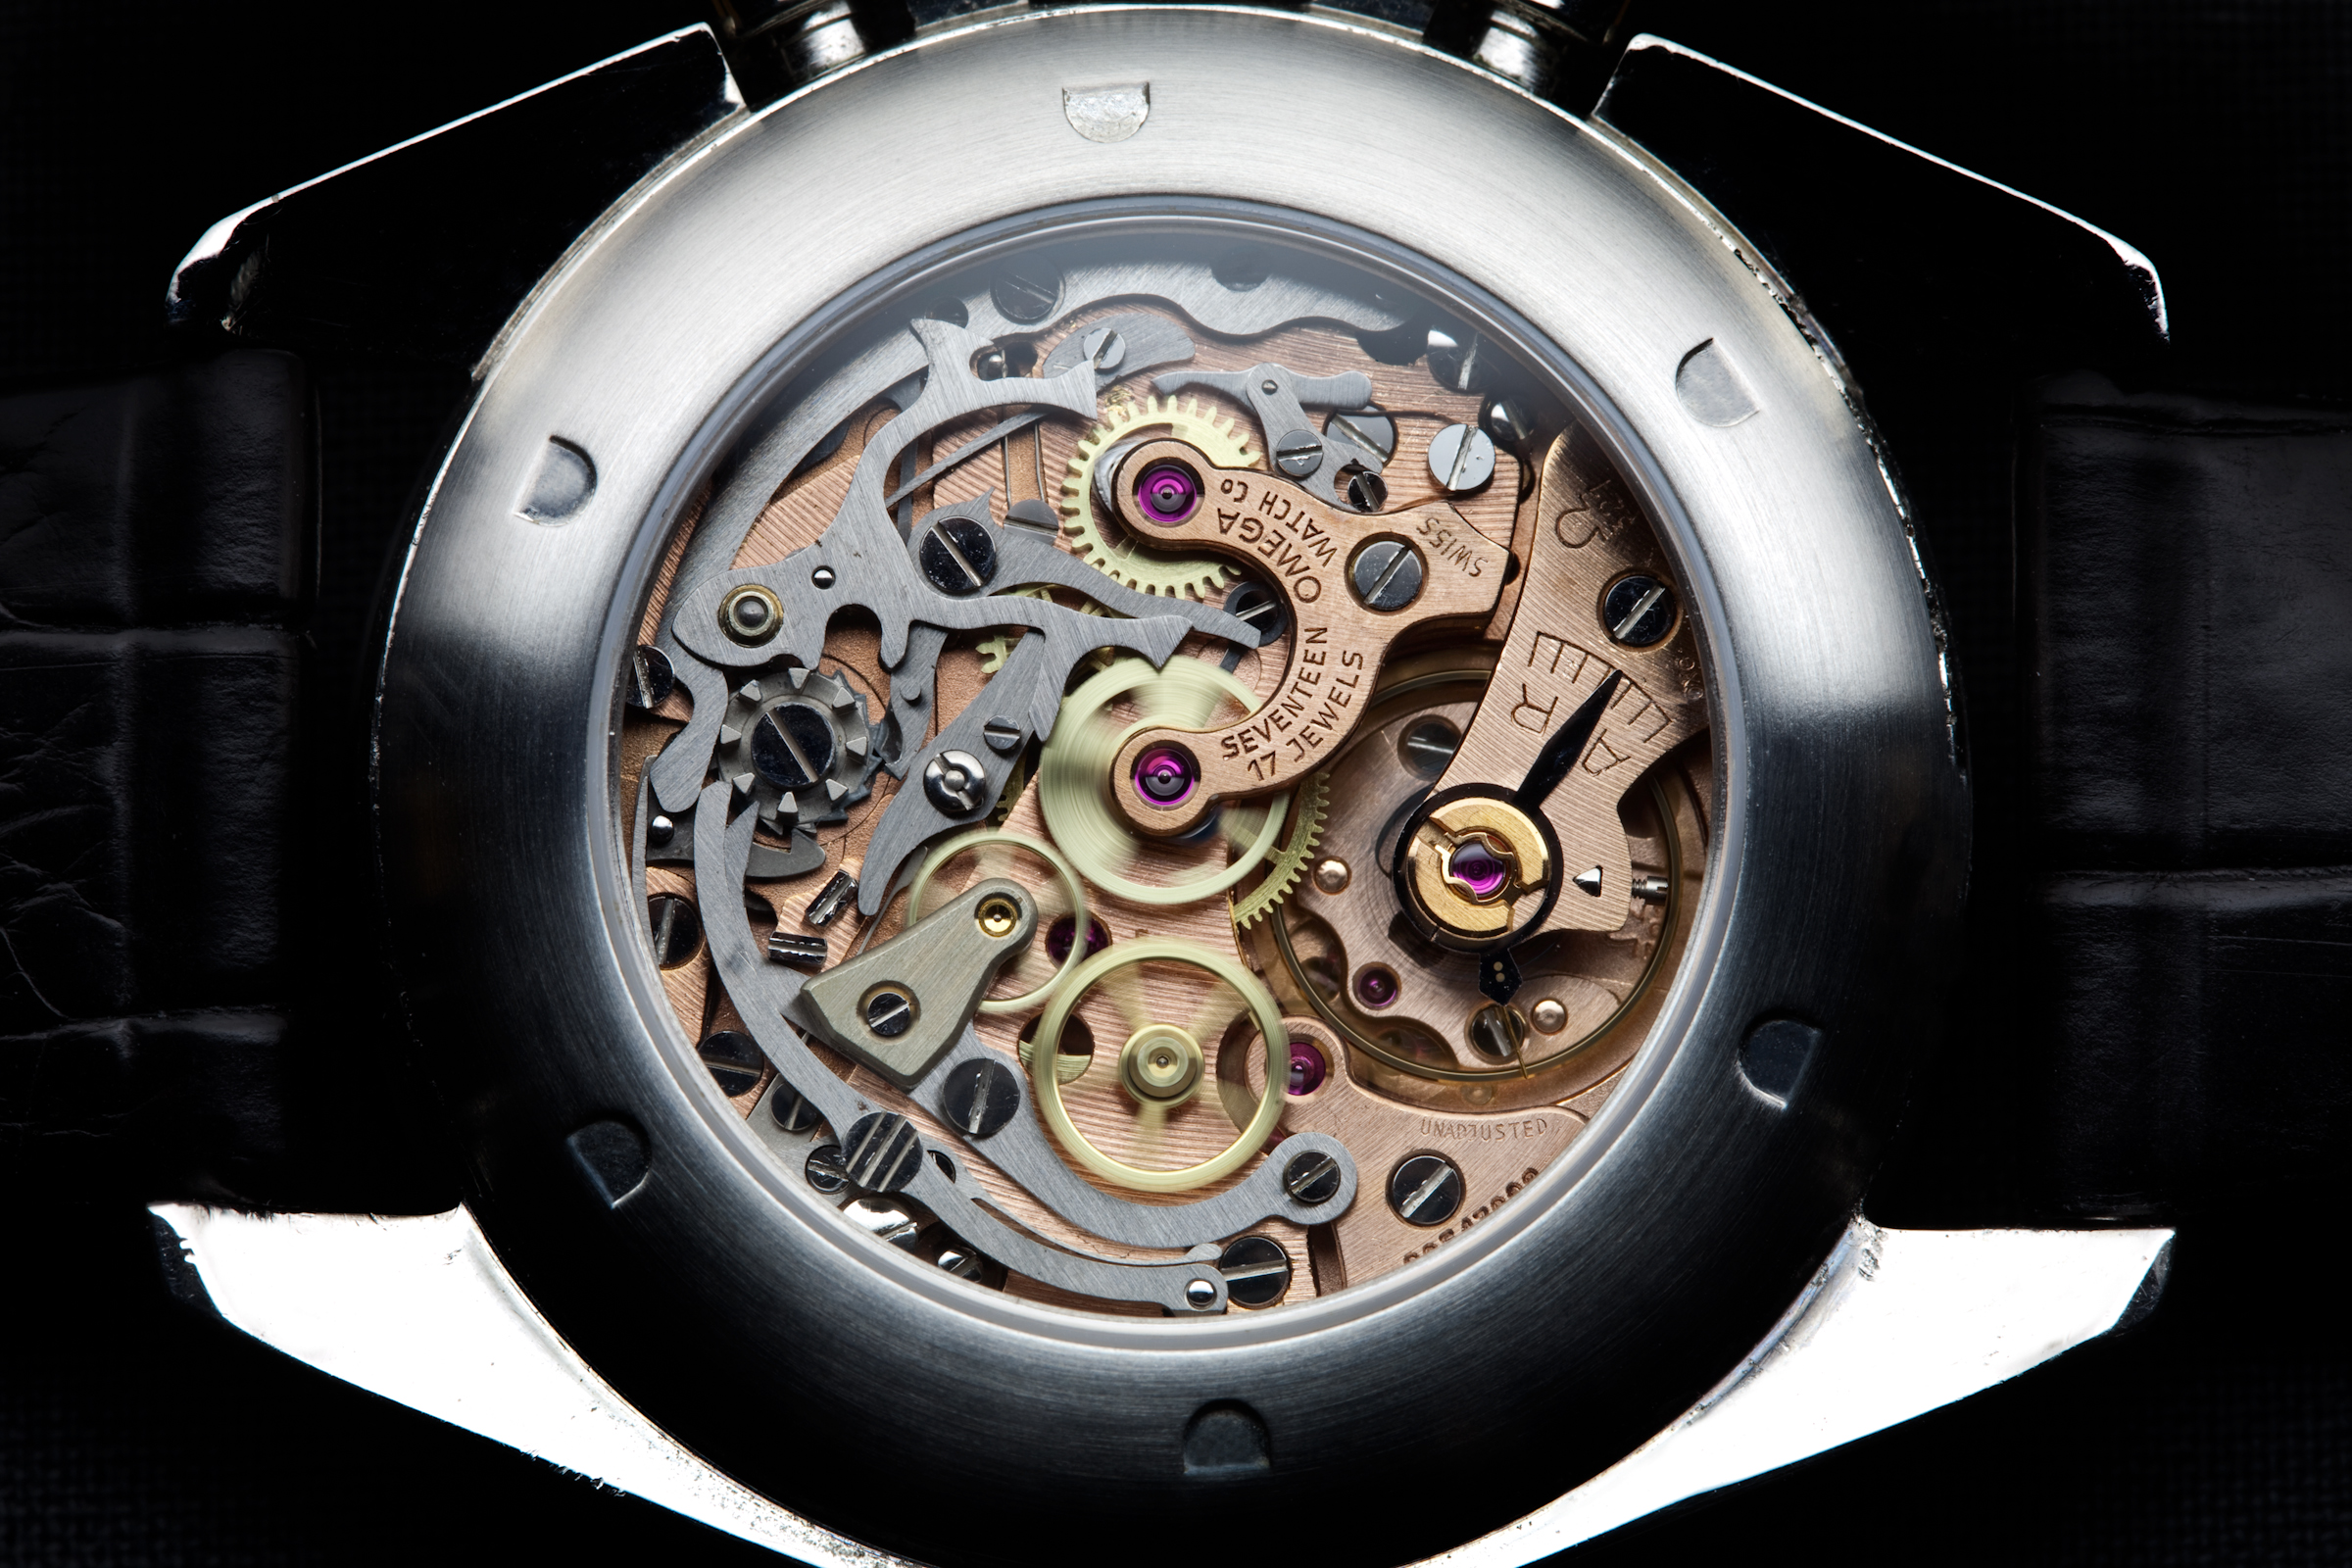 The hand wound Cal. 321 Movement of the Omega Speedmaster ...